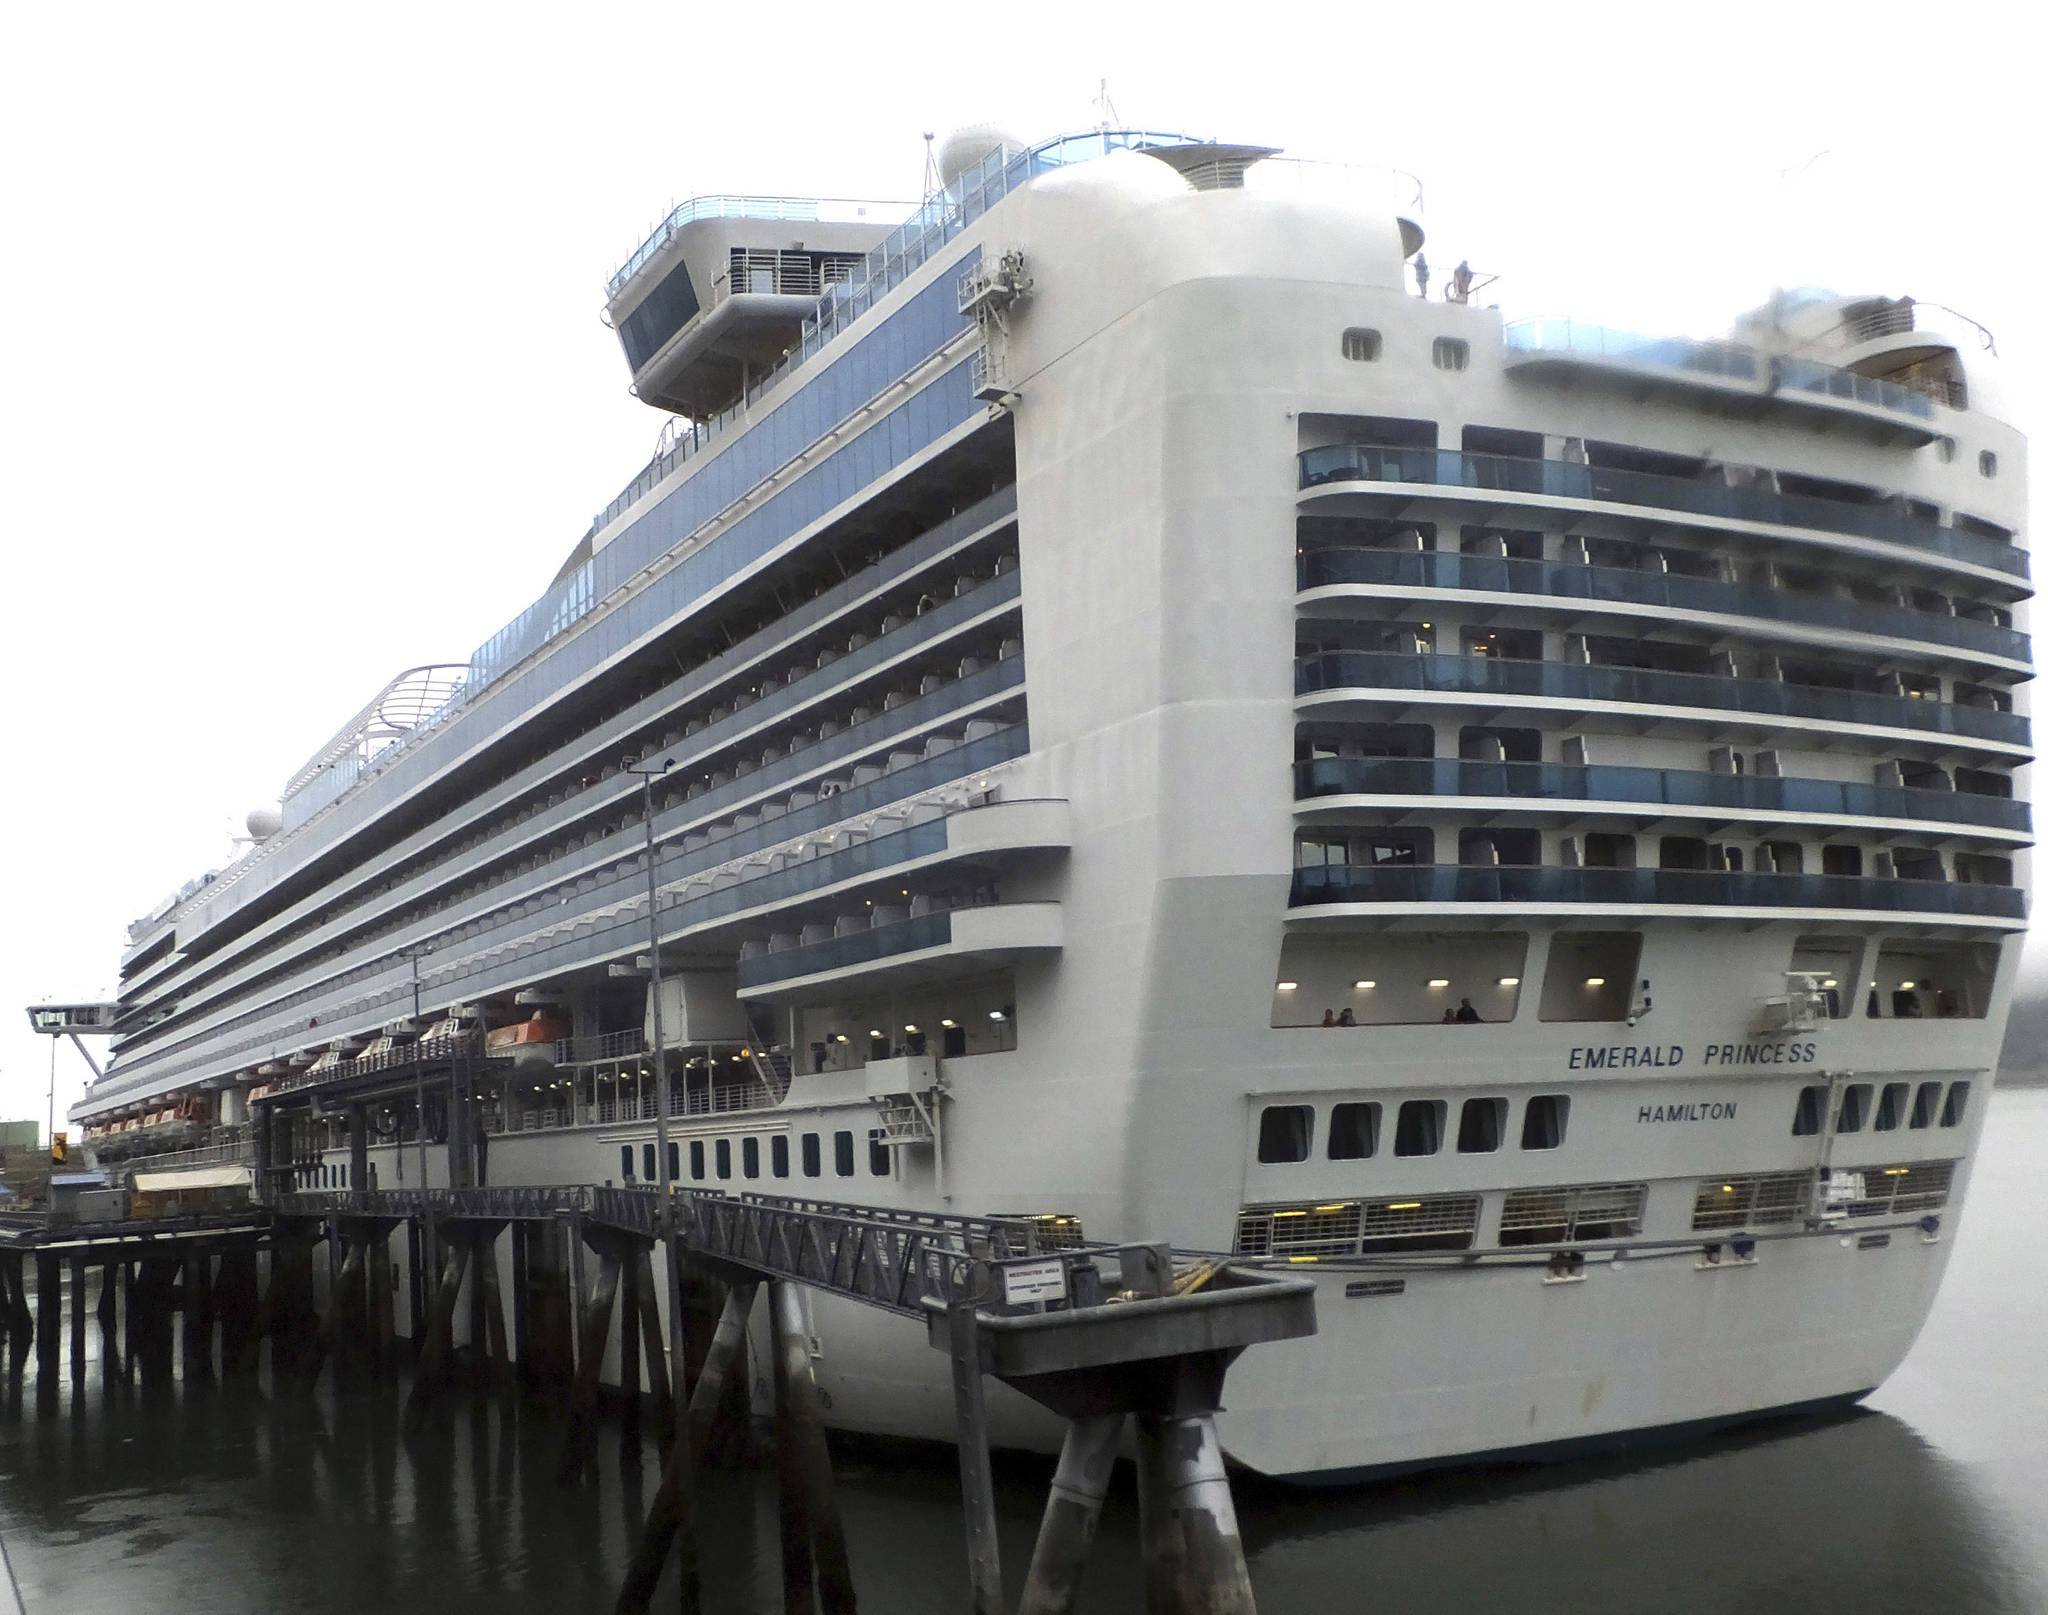 The Emerald Princess cruise ship is docked in Juneau Wednesday. The FBI is investigating the domestic dispute death of a Utah woman on board the ship, which was traveling in U.S. waters outside Alaska. (AP Photo/Becky Bohrer)